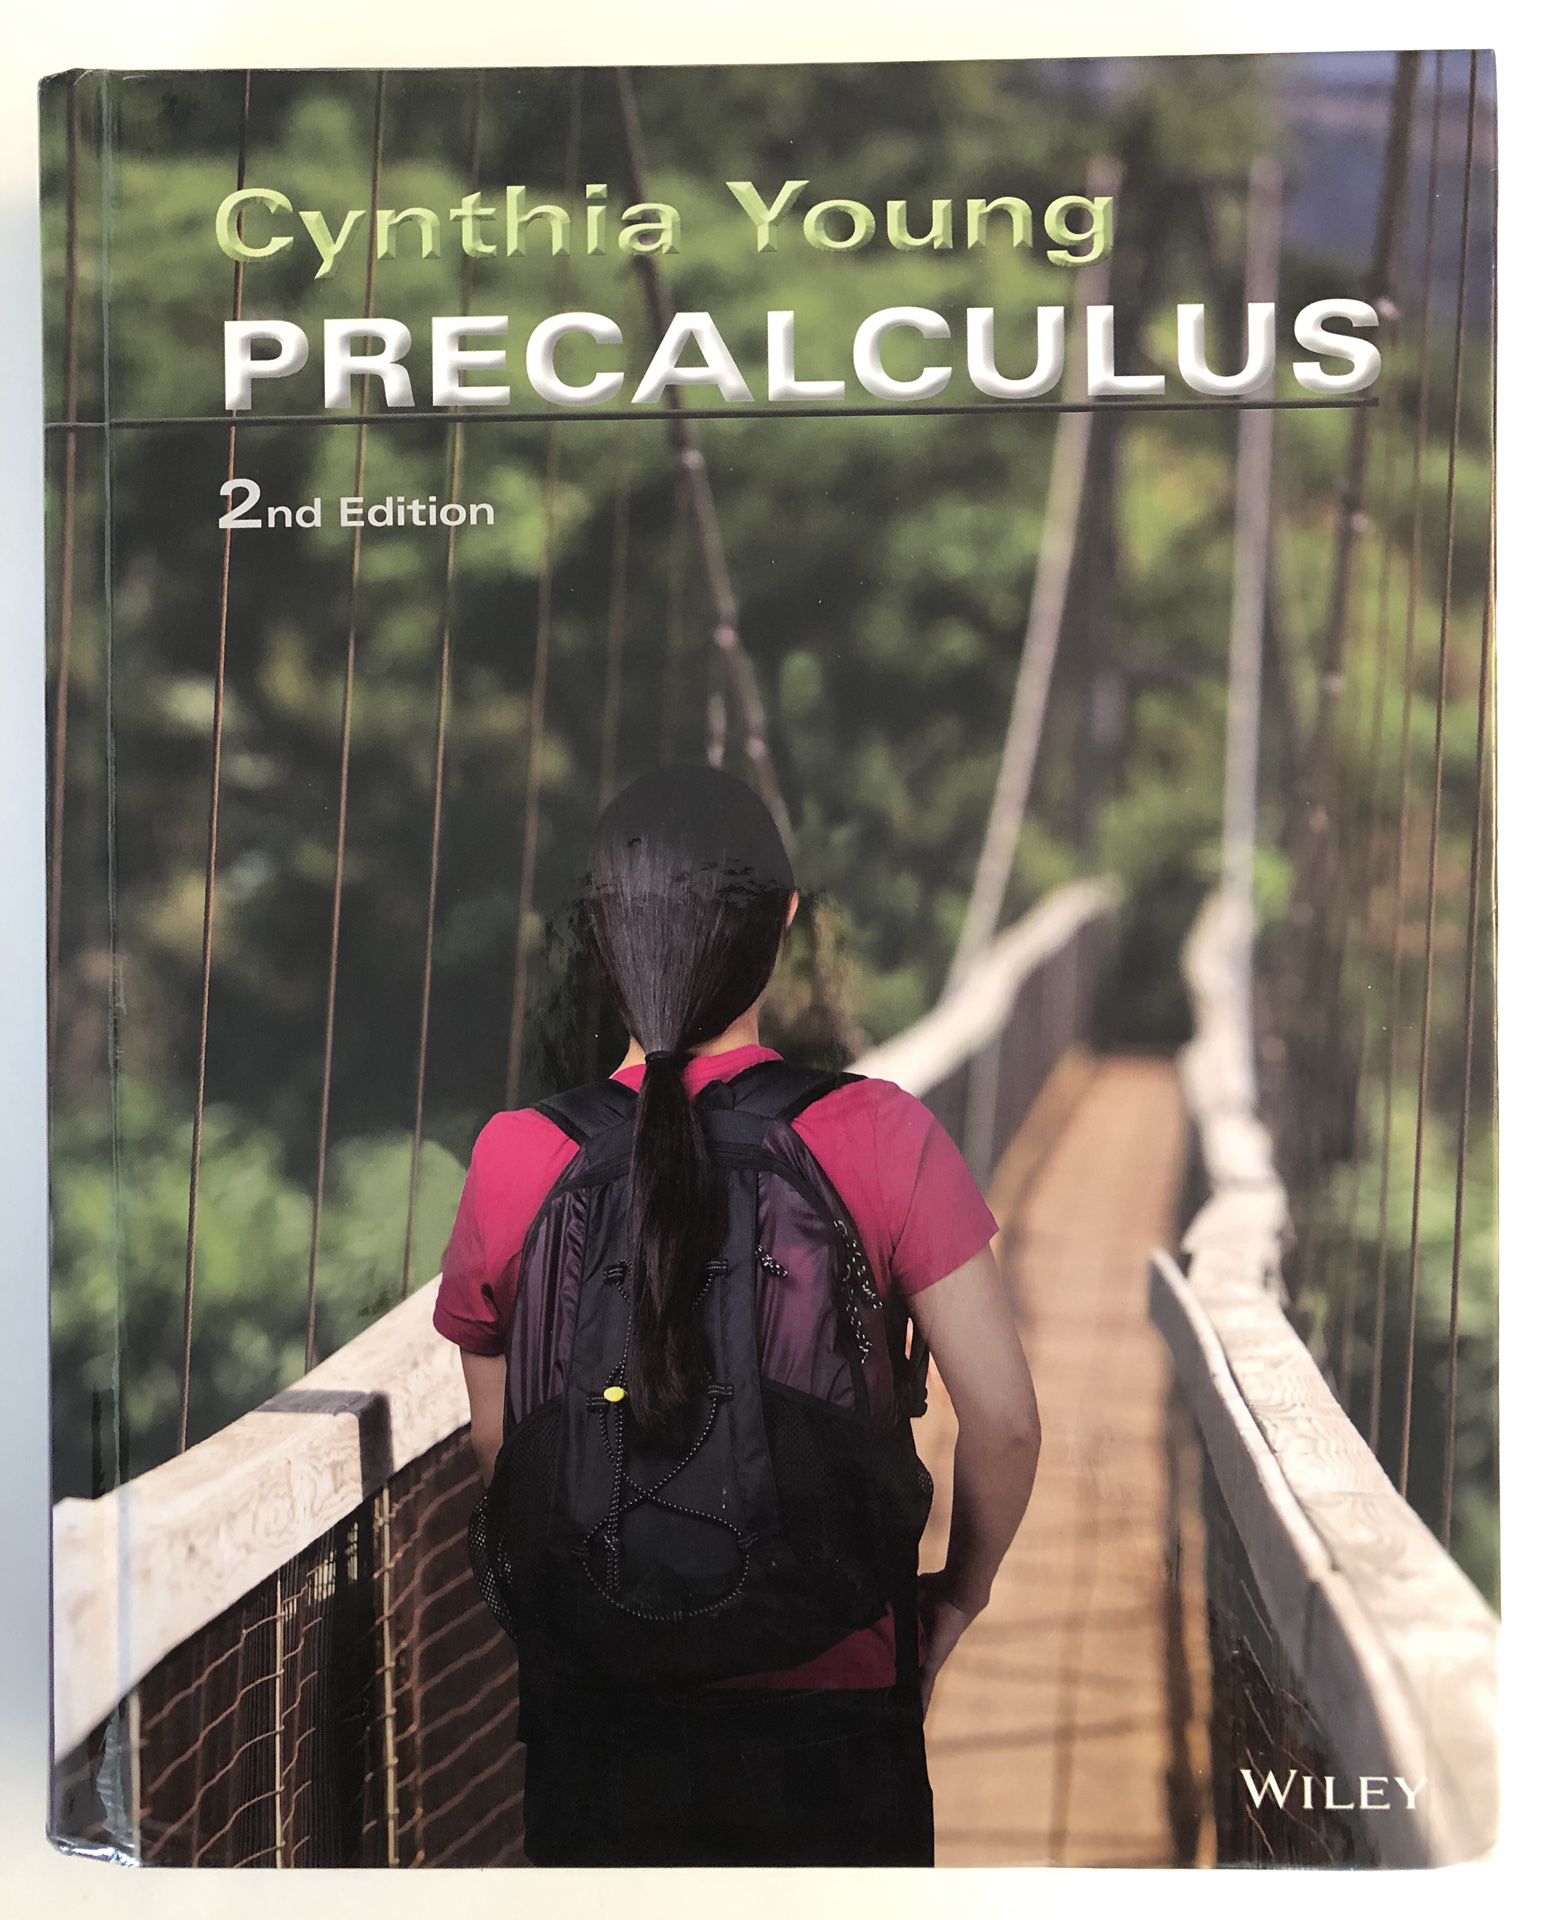 Precalculus 2nd Edition Hardcover Book by Cynthia Young - NEW